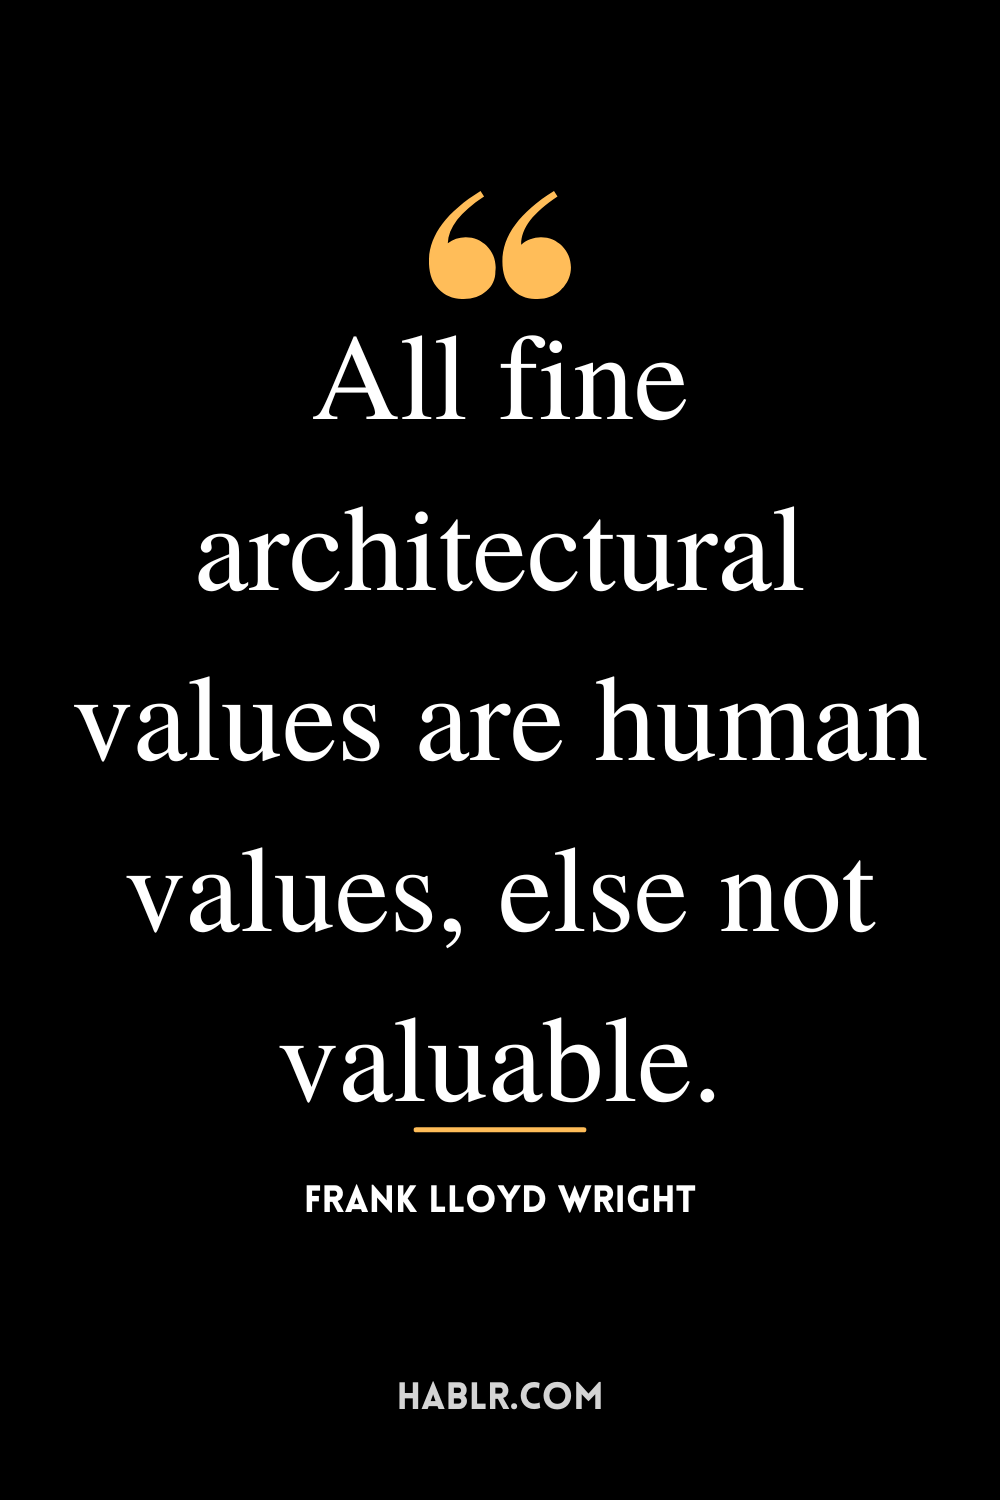 "All fine architectural values are human values, else not valuable." -Frank Lloyd Wright